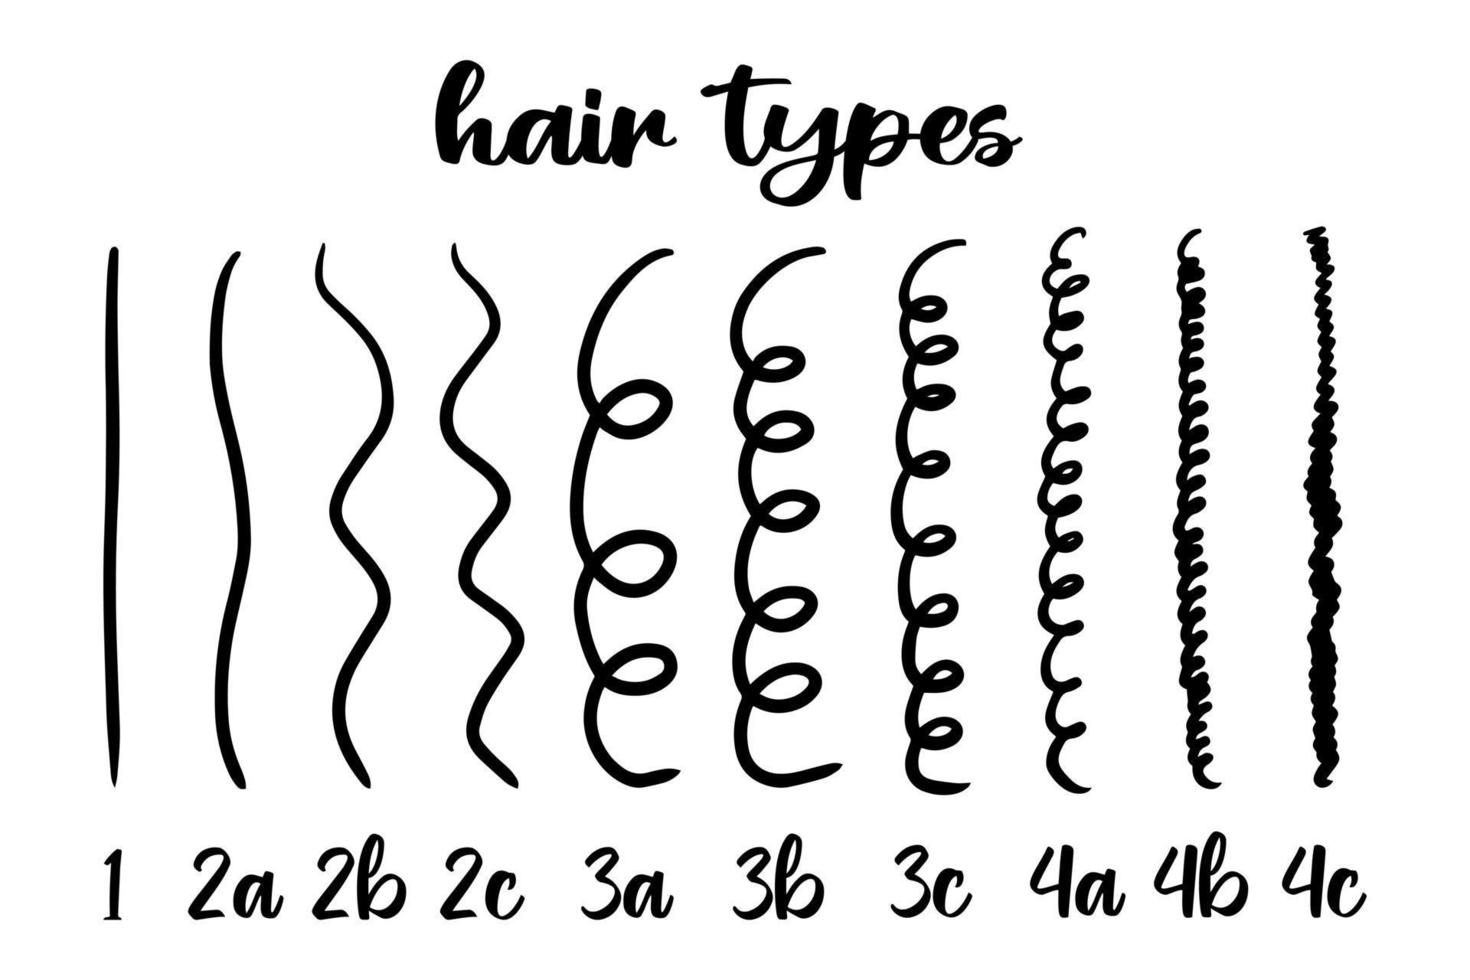 Hair type guide with labels. Curl patterns classification vector